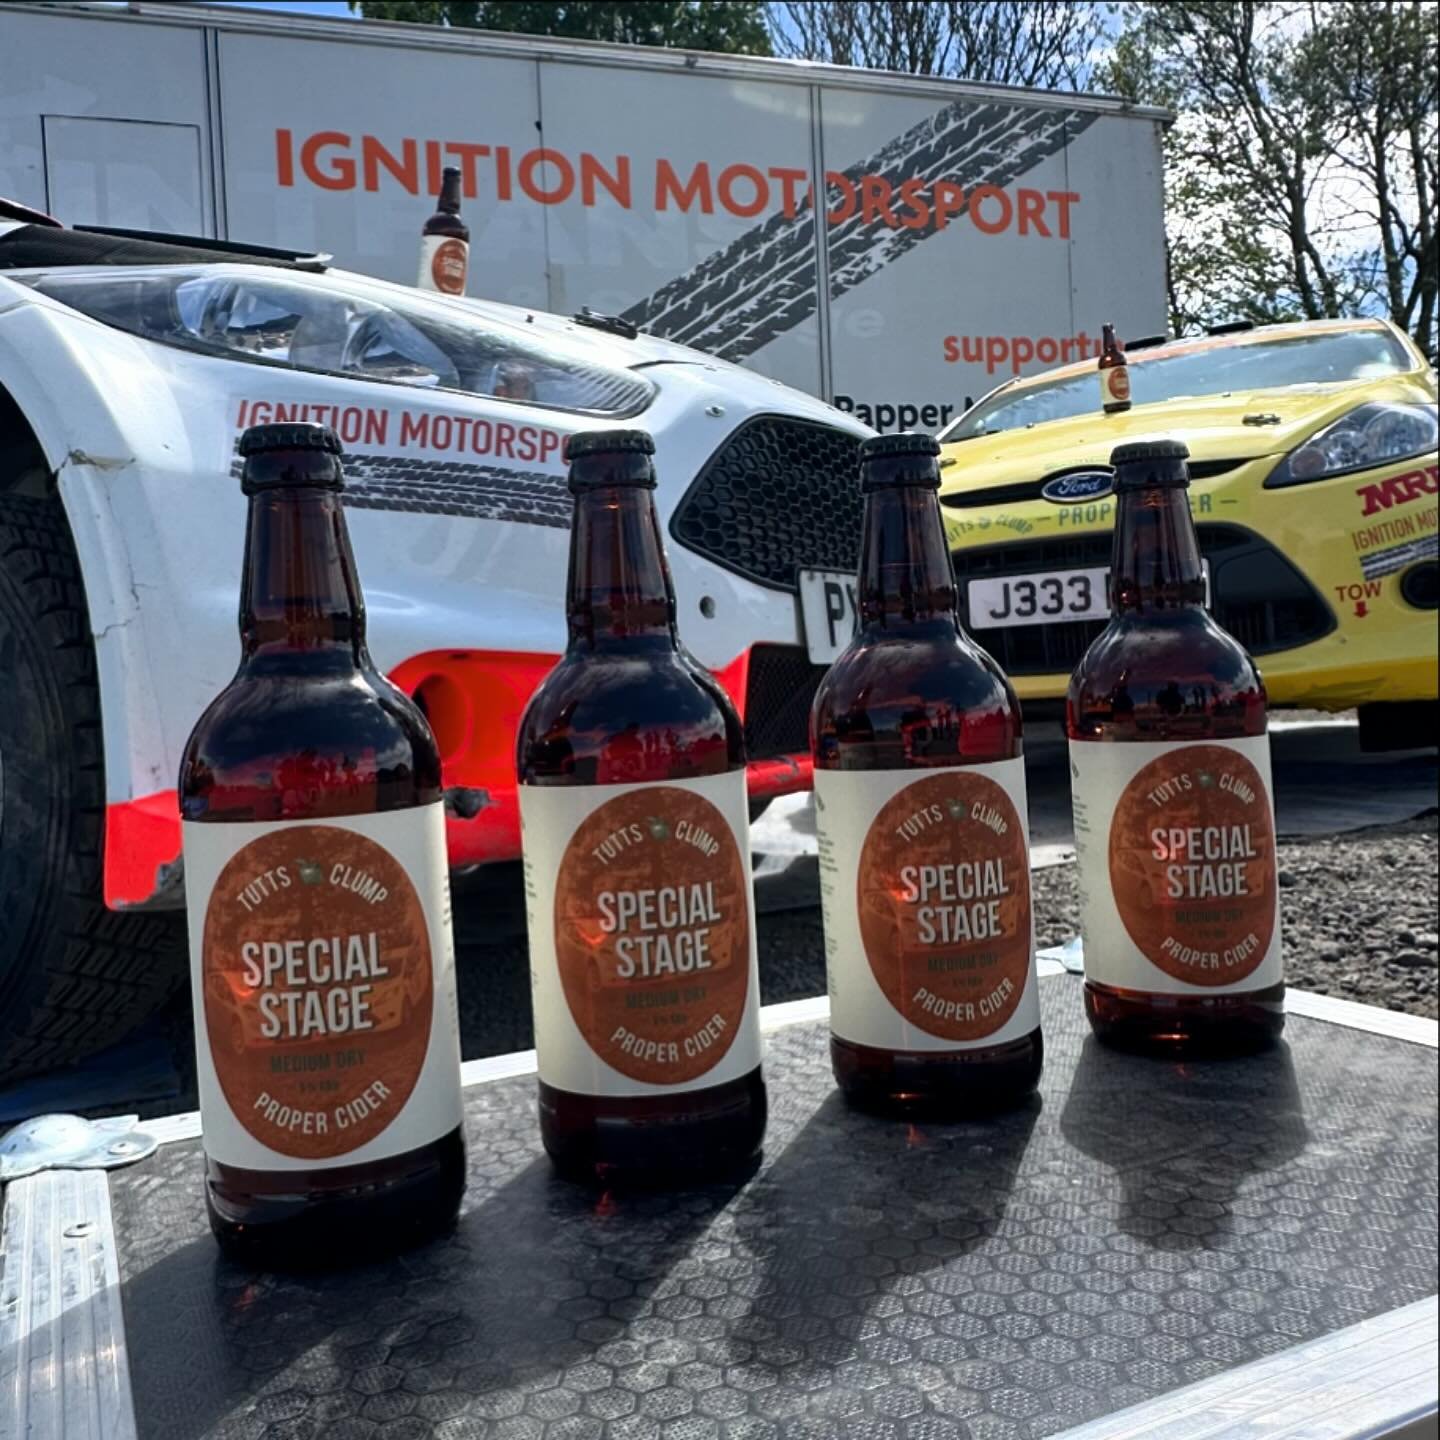 Where would you drink yours? 🍏 Sip on the new &lsquo;Special Stage&rsquo; Proper Cider by @tuttsclumpciderofficial! 🚗 Limited Edition label adorned with the @ignitionmotorsport Fiesta R5 &amp; R2. 

Keep tabs on our socials for details on snagging 